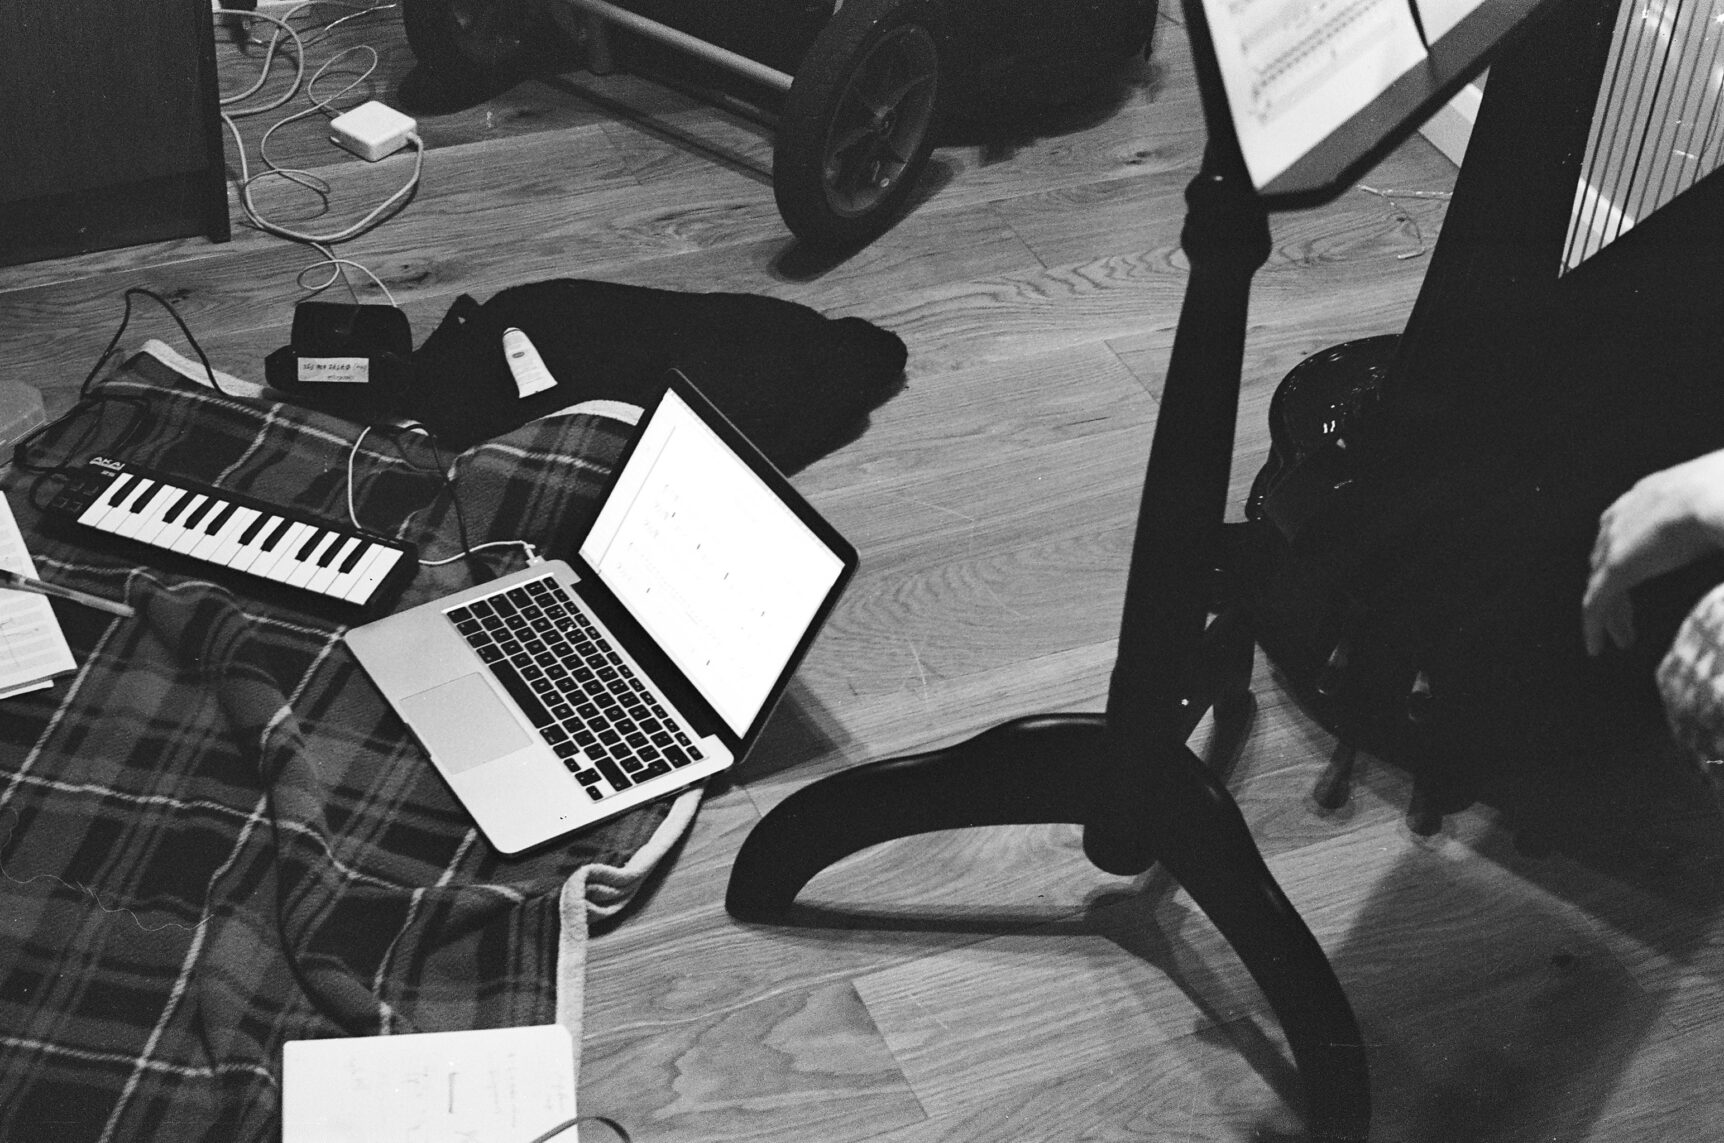 A black and white film photograph of a studio including a laptop and keyboard on a blanket on a wooden floor, and a music stand.